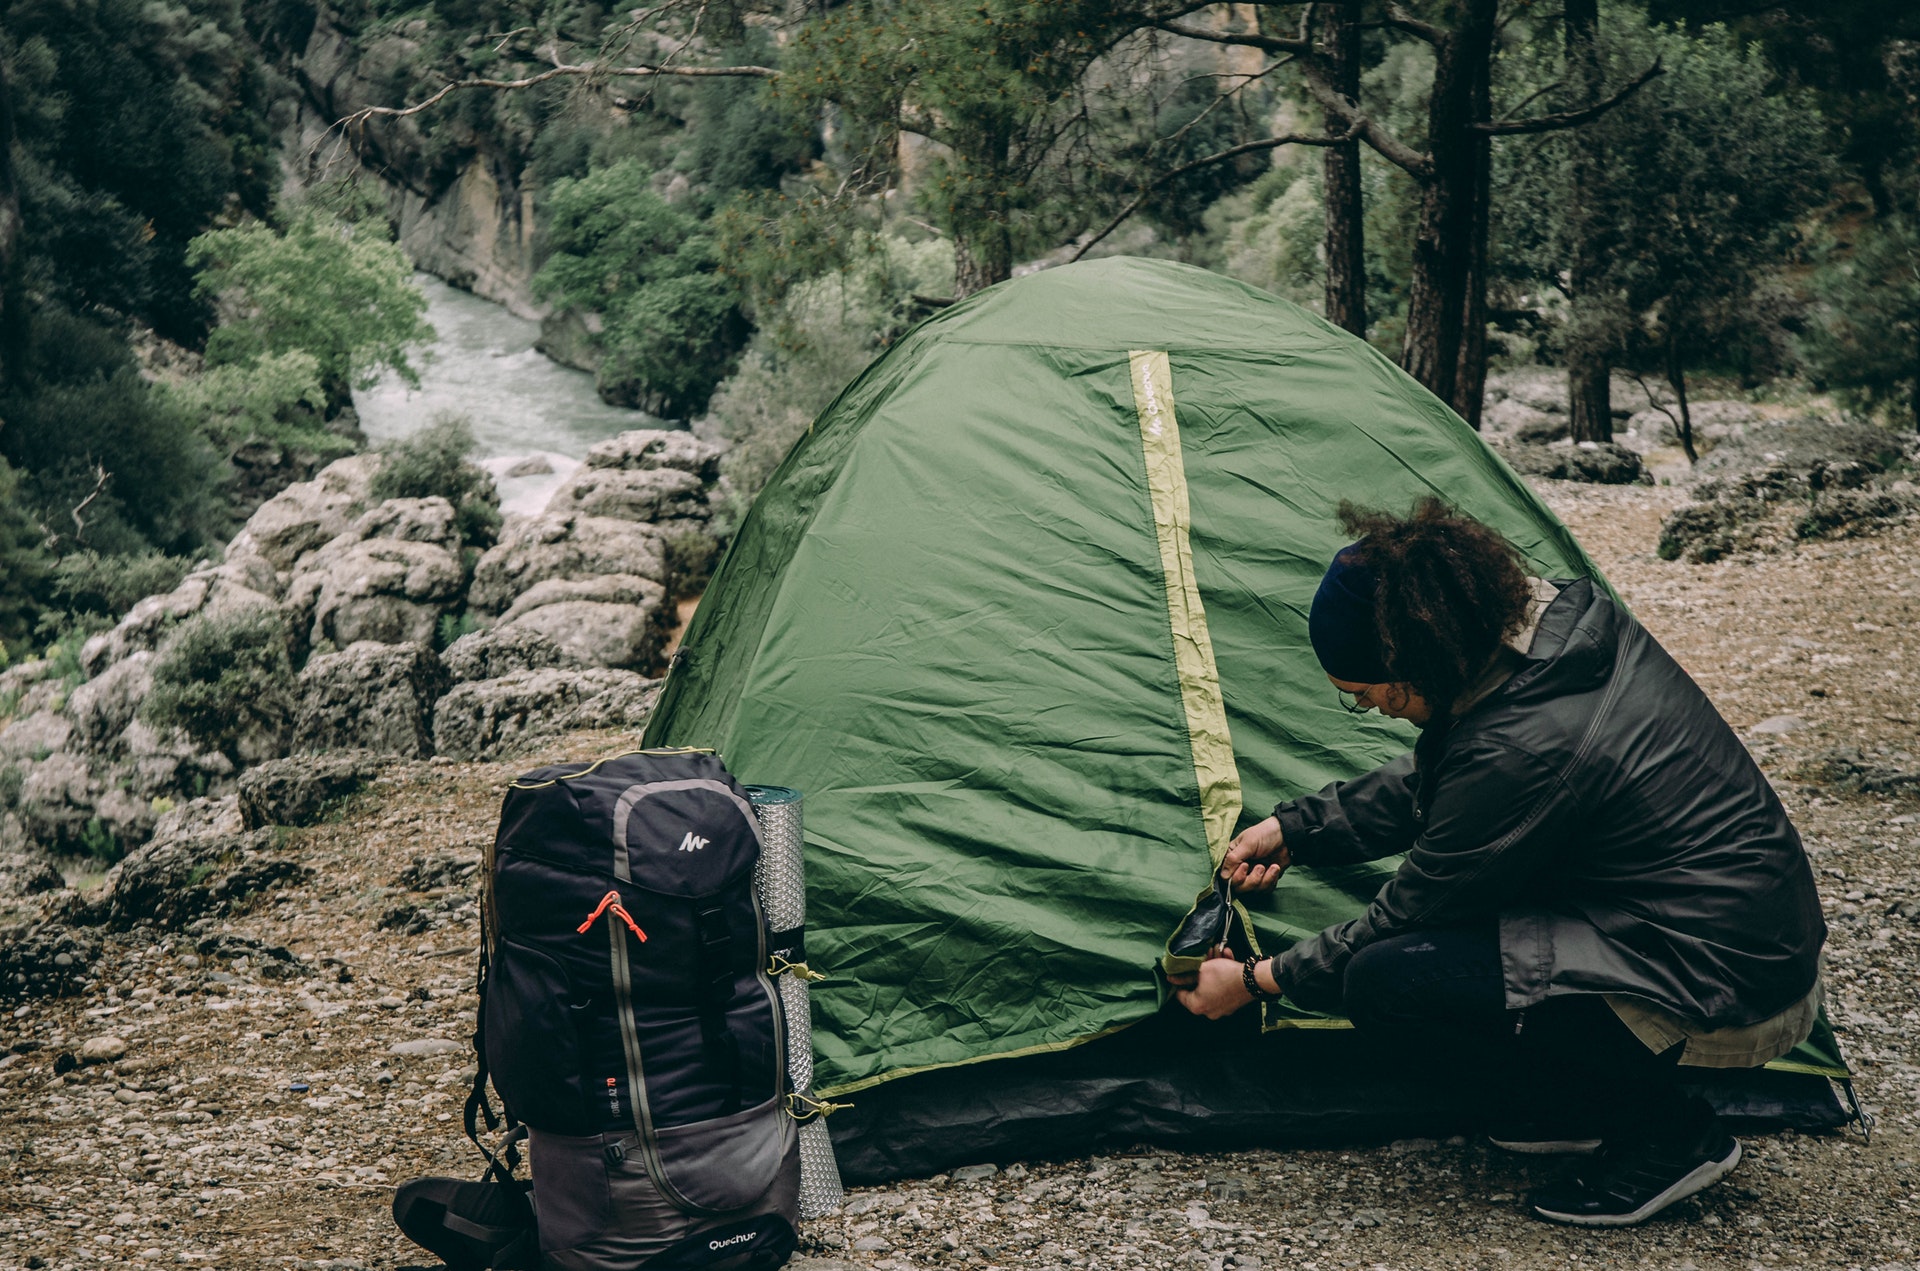 Is Adventuring Safe And Reliable Without The Tents?